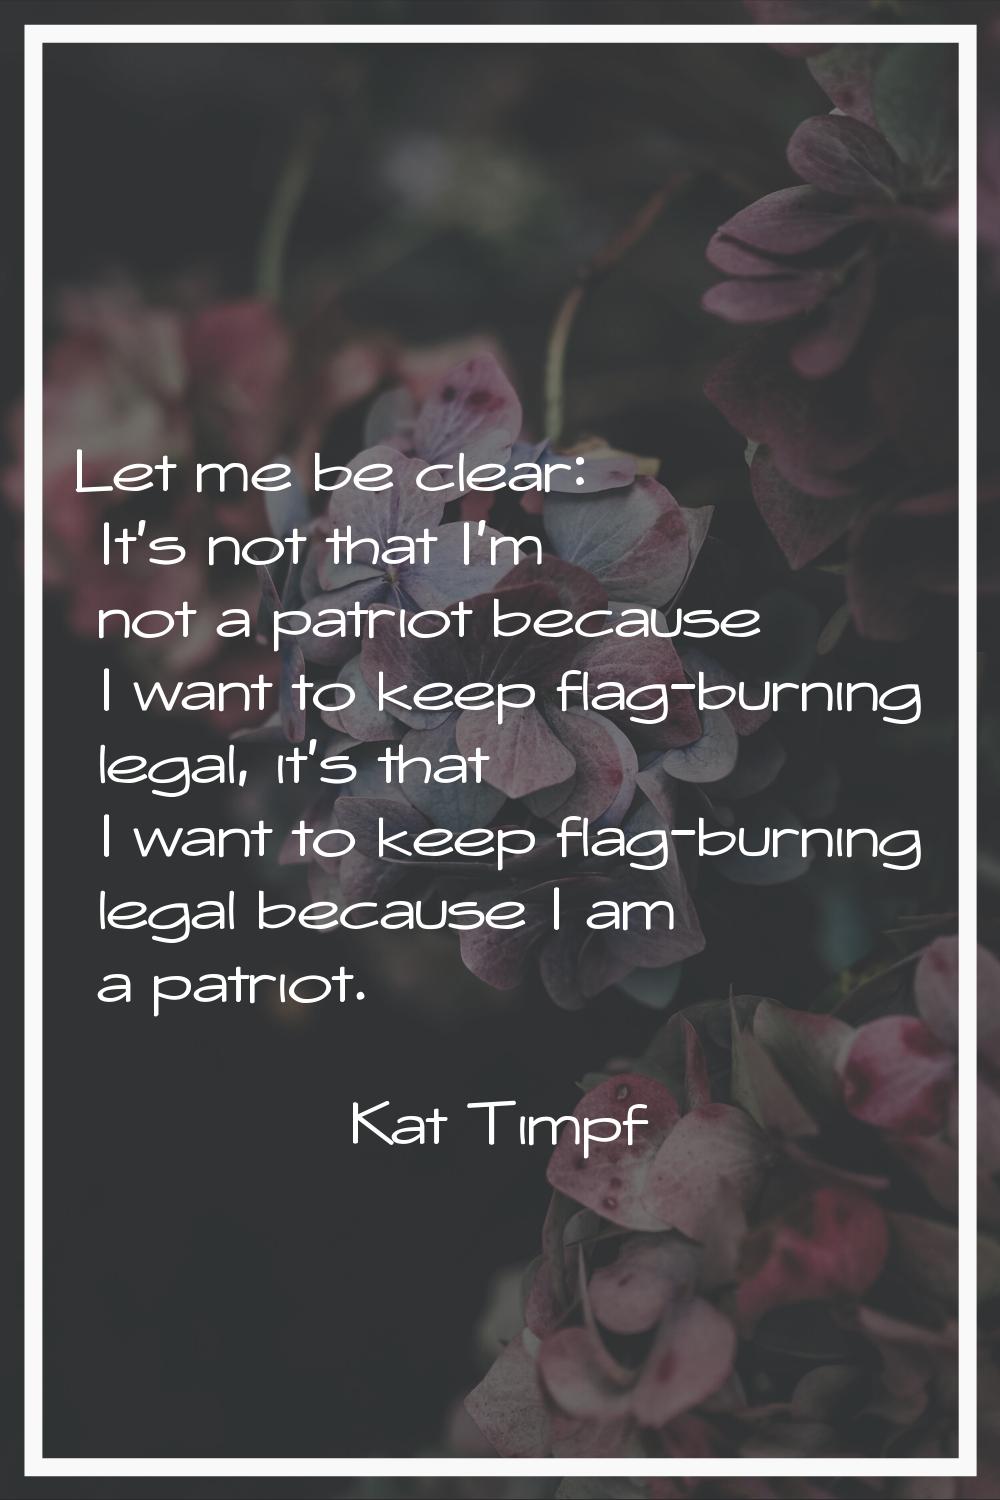 Let me be clear: It's not that I'm not a patriot because I want to keep flag-burning legal, it's th